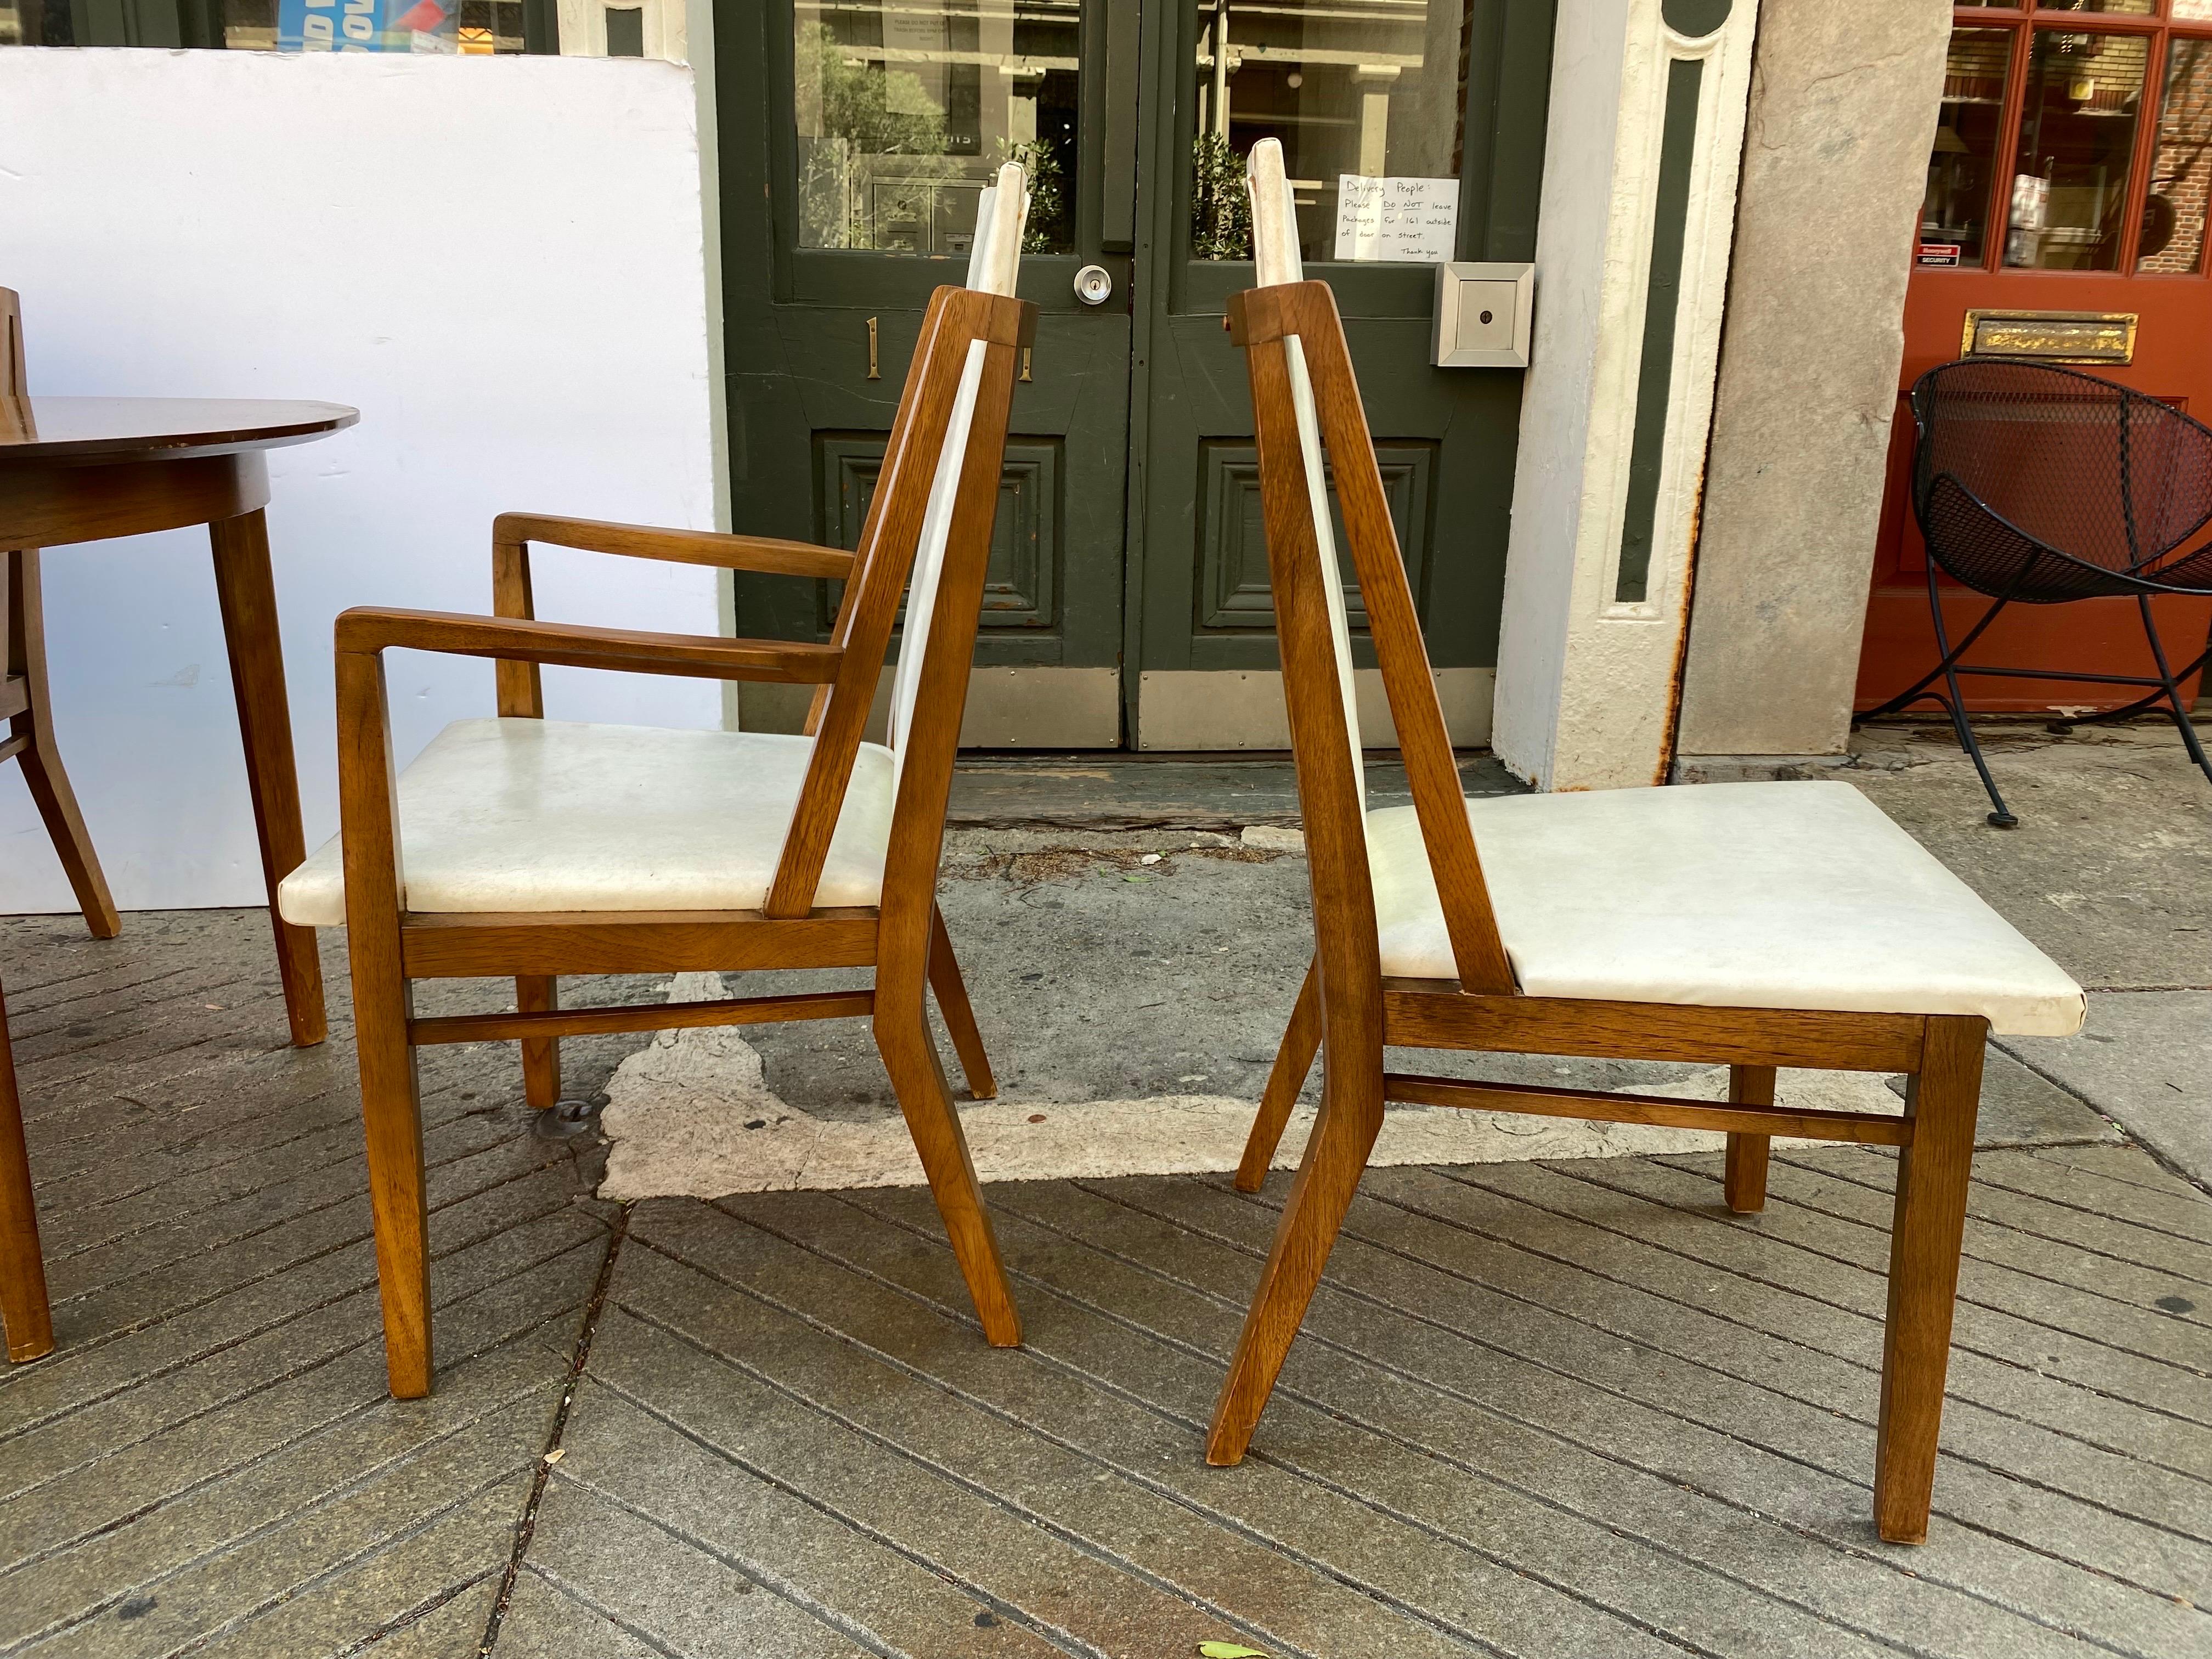 Drexel Design for living dining room set. Table with 2 leaves and 2 Armed Chairs and 4 armless chairs. Set is all original and in very nice shape. Table is slightly Boat-shaped. Banded edge. Table measures 60 x40 when closed. Two 18